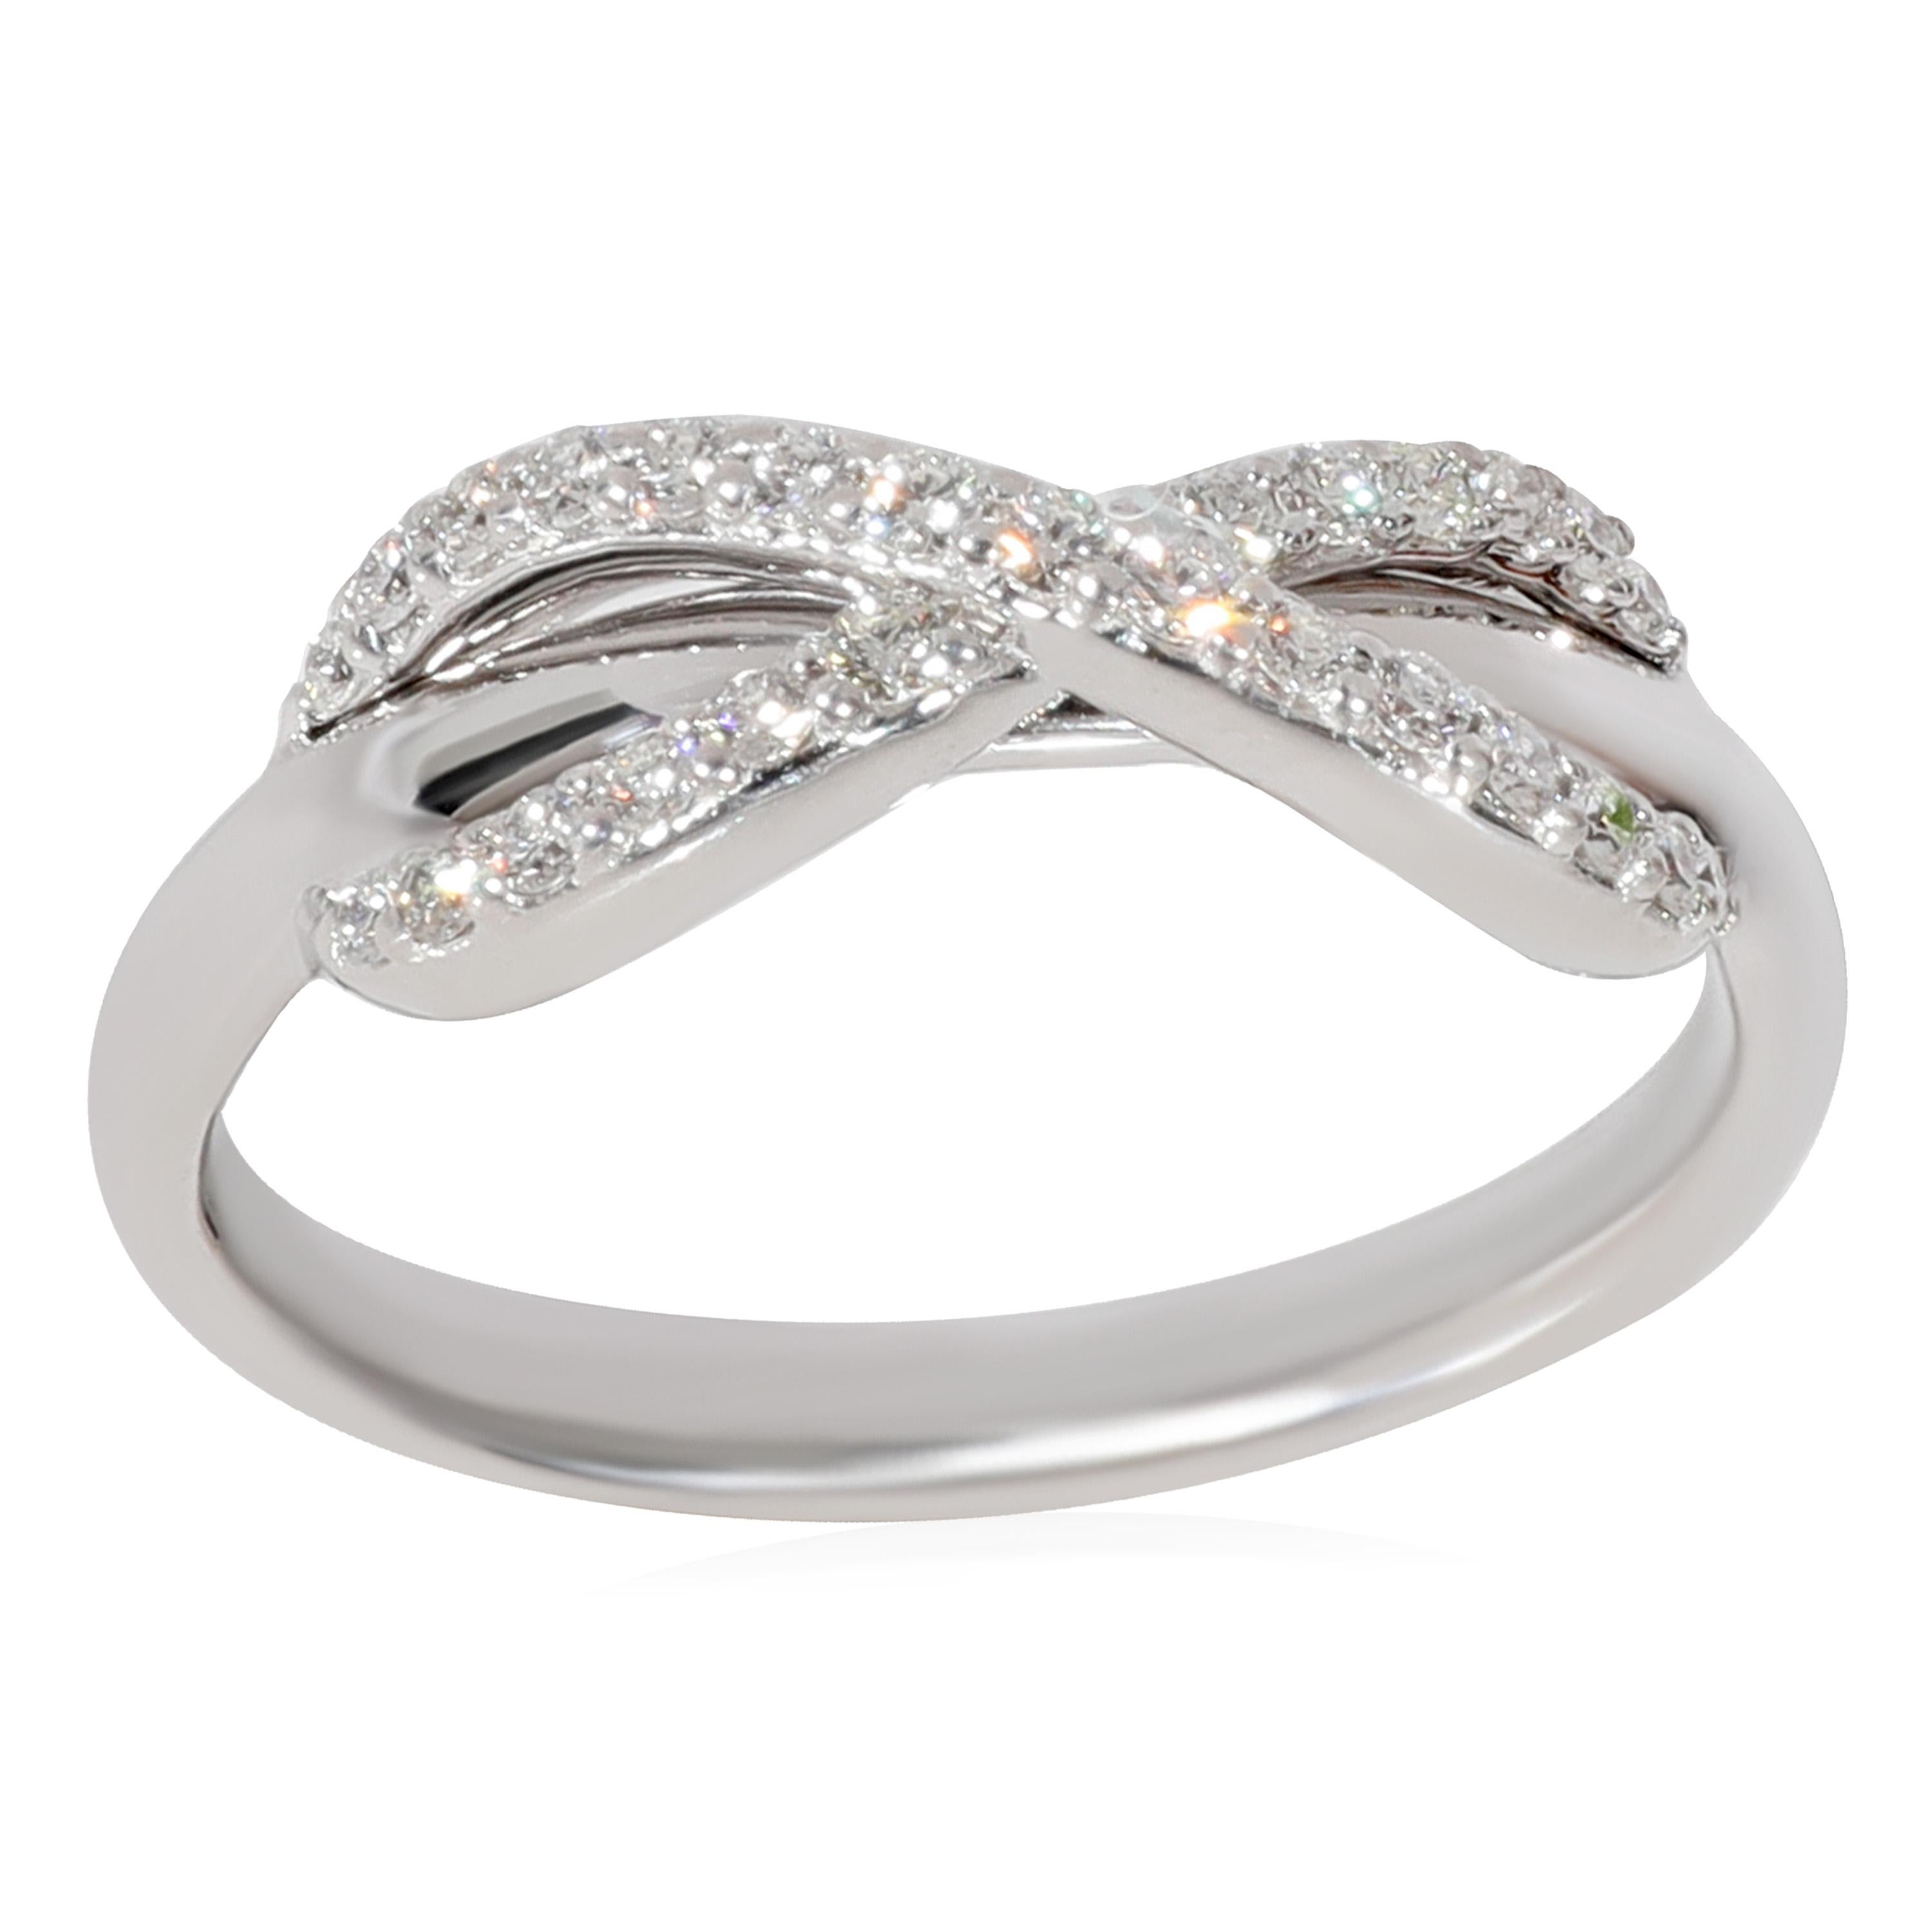 Tiffany & Co. Infinity Diamond Fashion Ring in 18k White Gold 0.13 CTW

PRIMARY DETAILS
SKU: 126346
Listing Title: Tiffany & Co. Infinity Diamond Fashion Ring in 18k White Gold 0.13 CTW
Condition Description: Tiffany celebrates friendship and